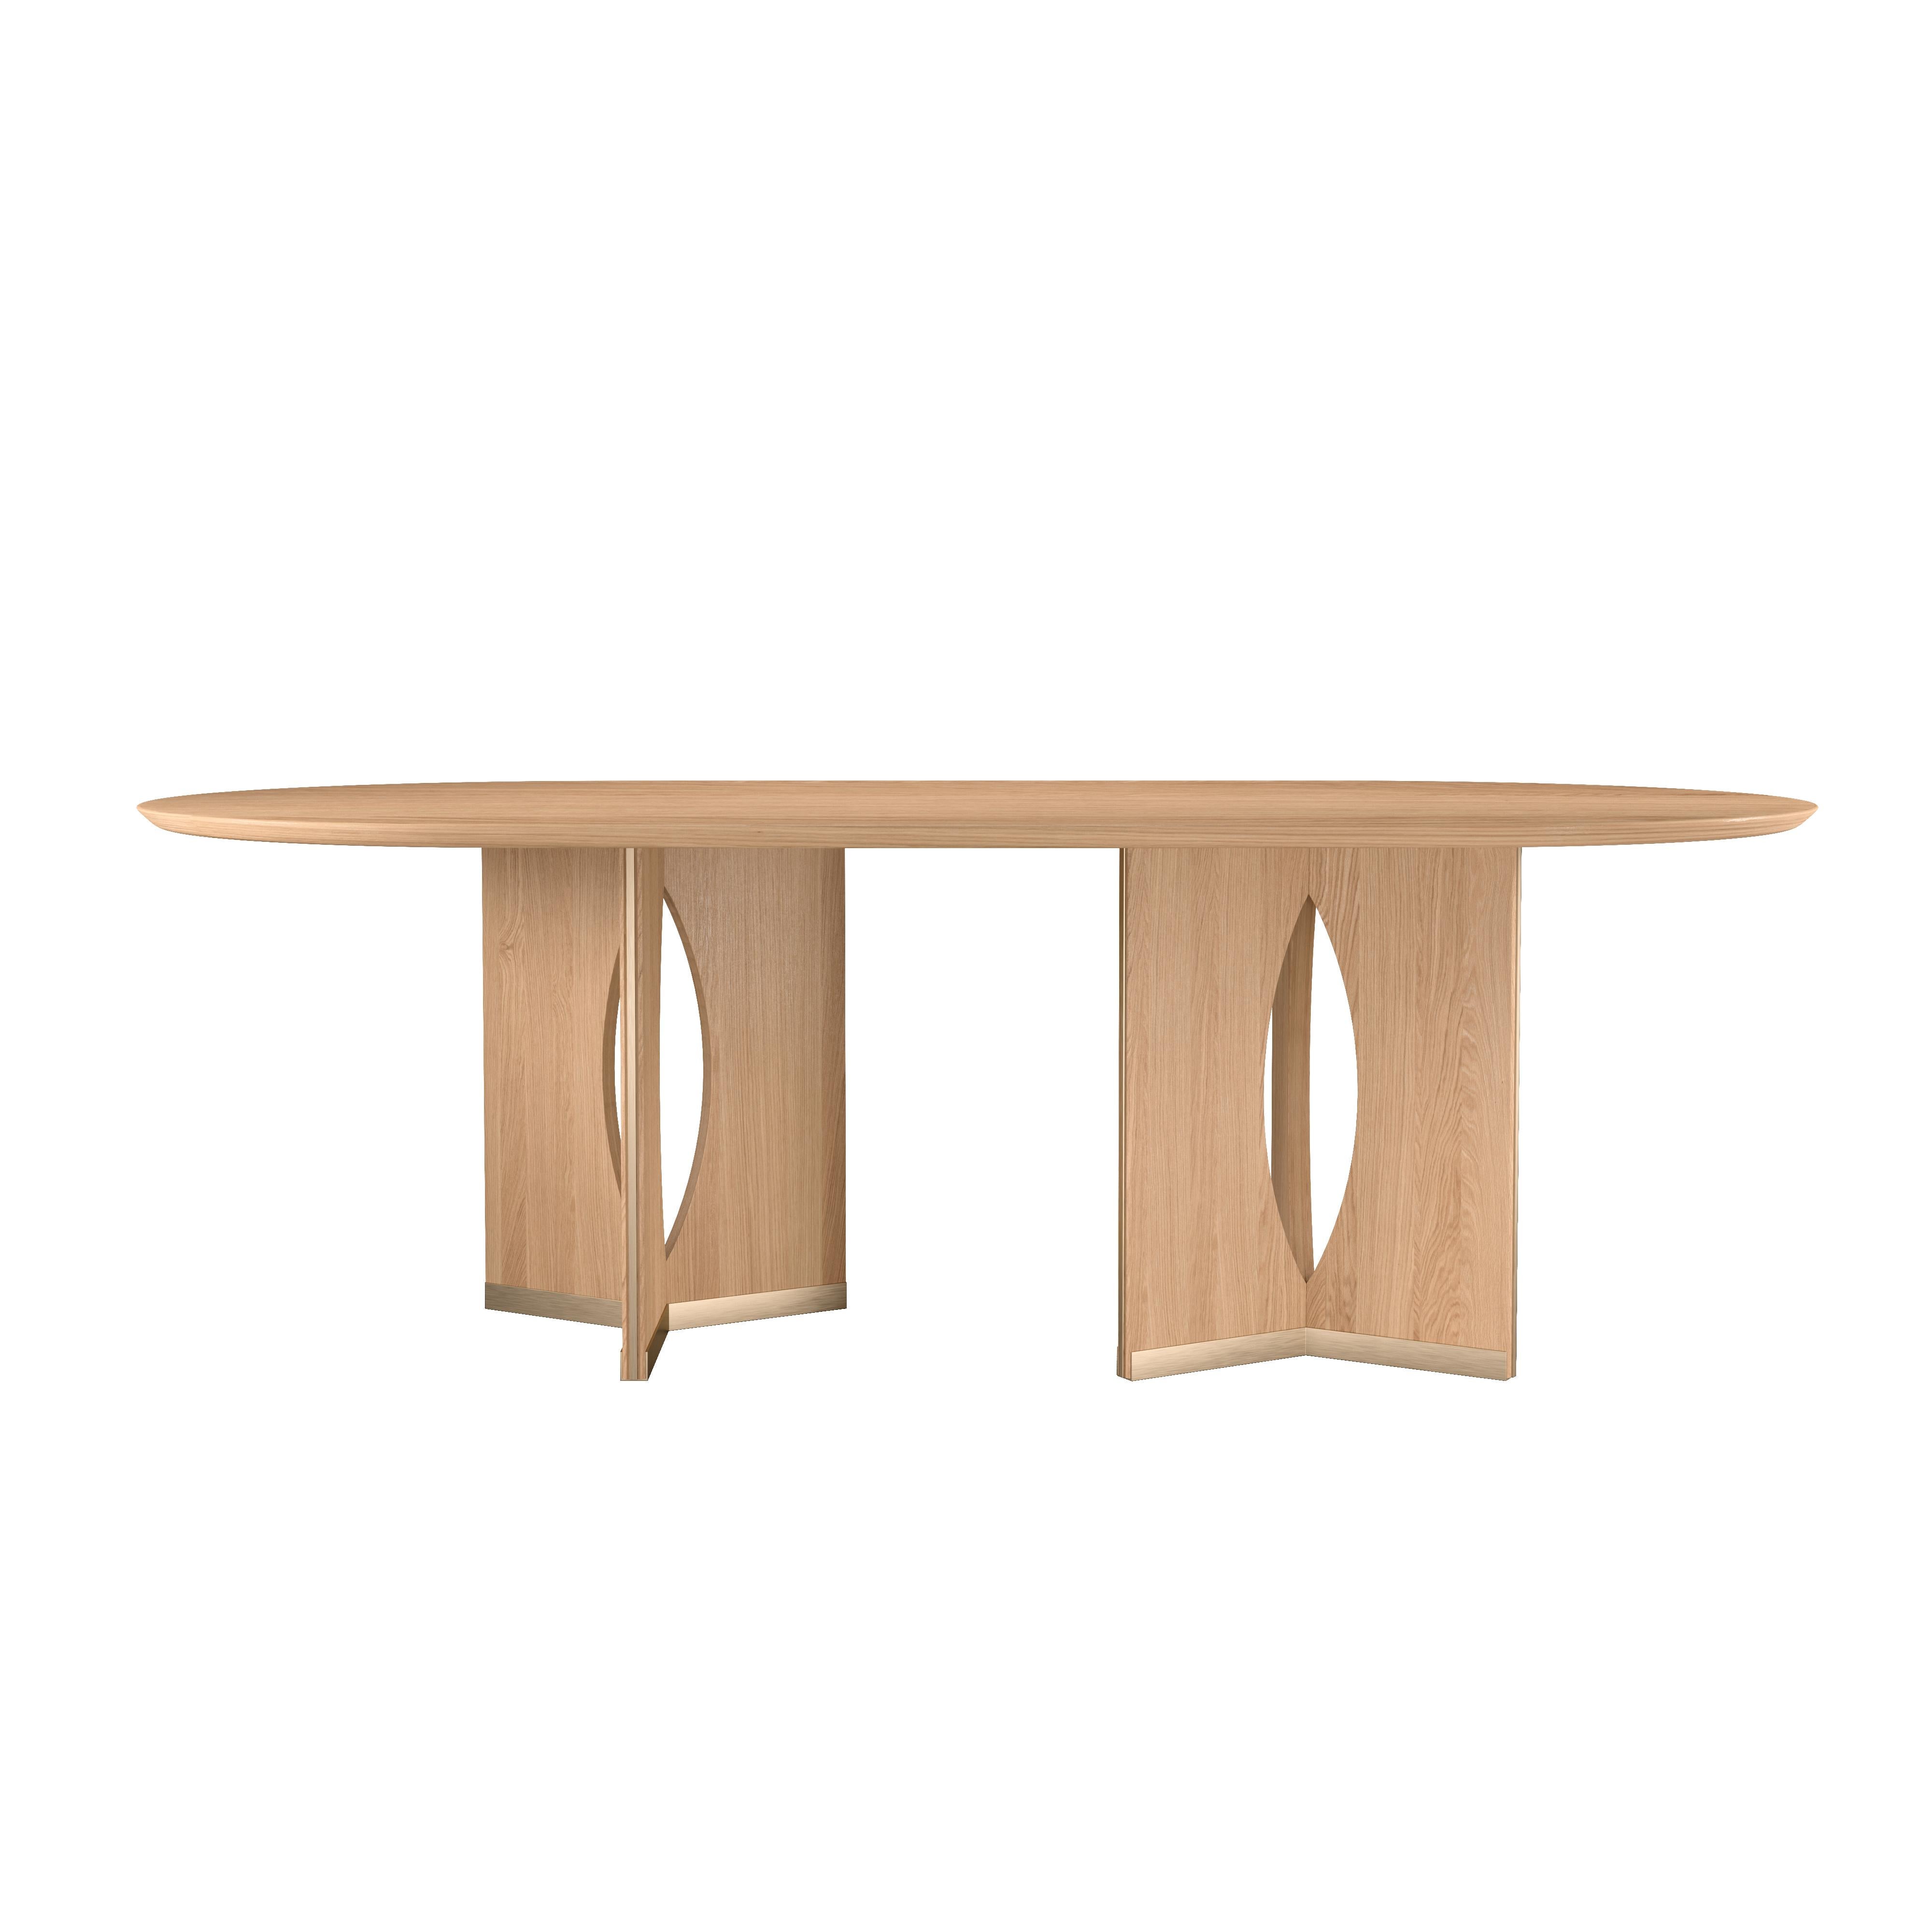 Portuguese 21st Century Walnut Wood Taylor Dining Table Brushed Brass For Sale